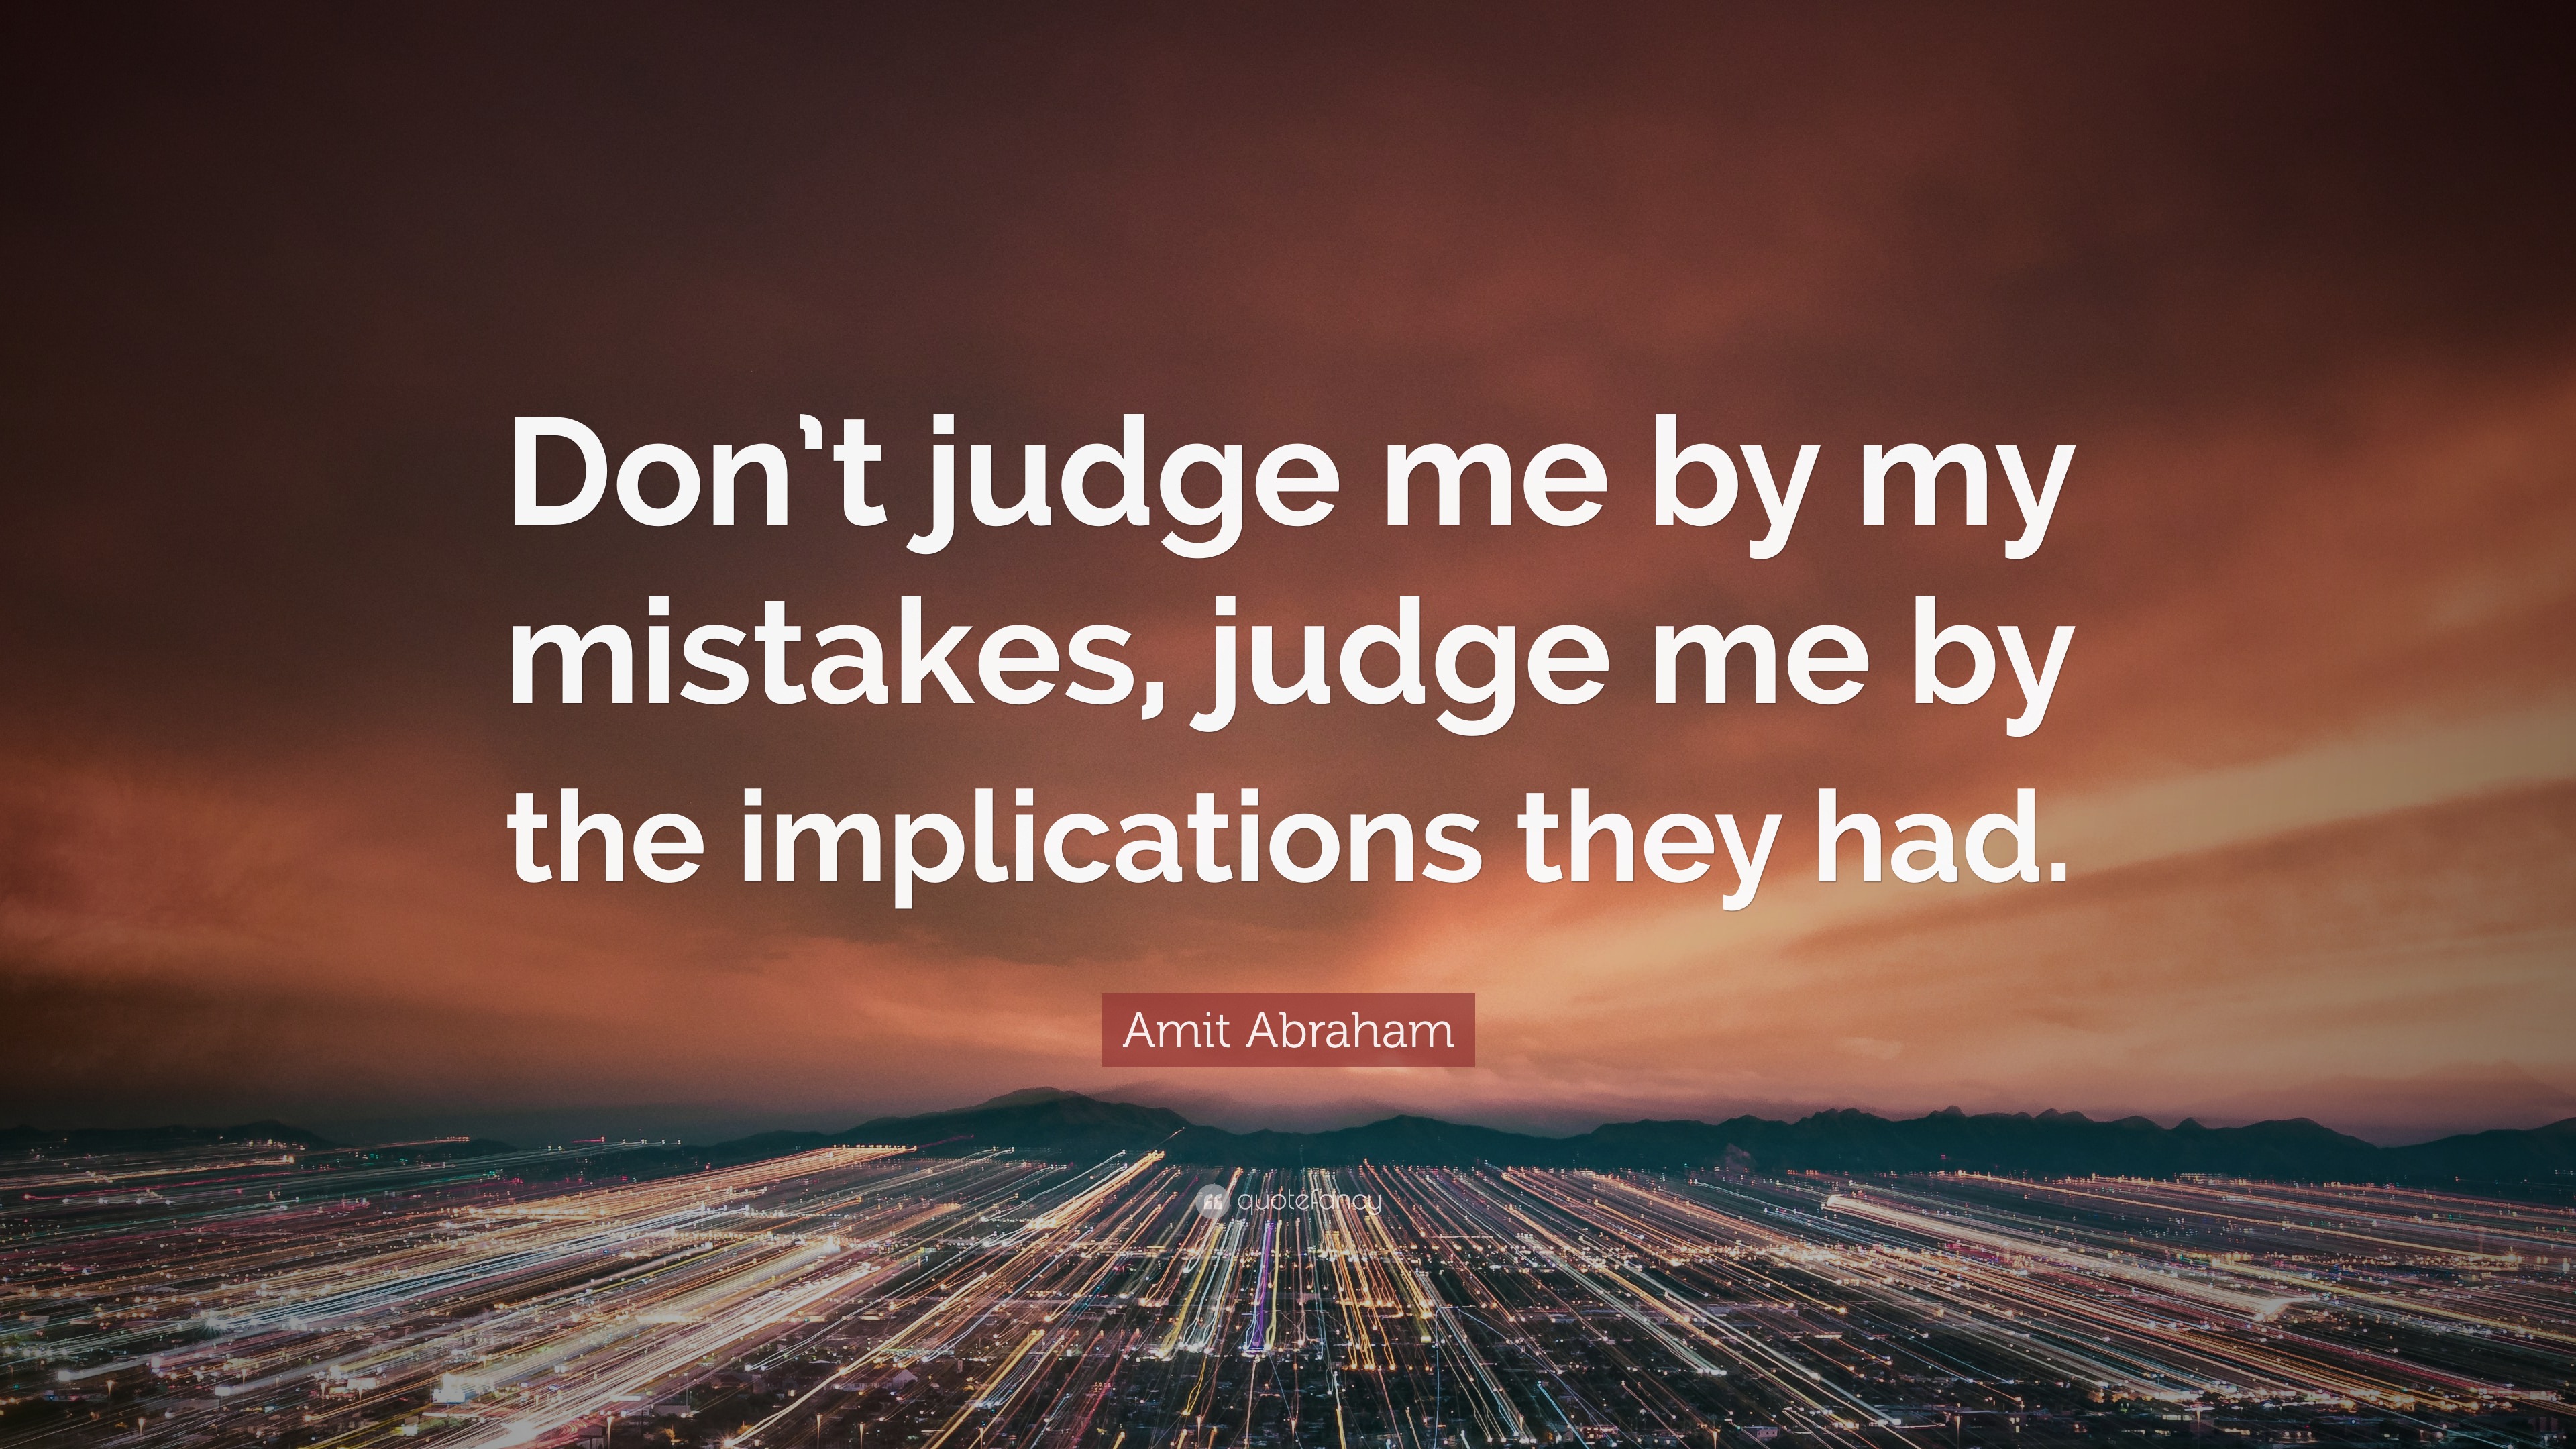 Amit Abraham Quote “dont Judge Me By My Mistakes Judge Me By The Implications They Had”